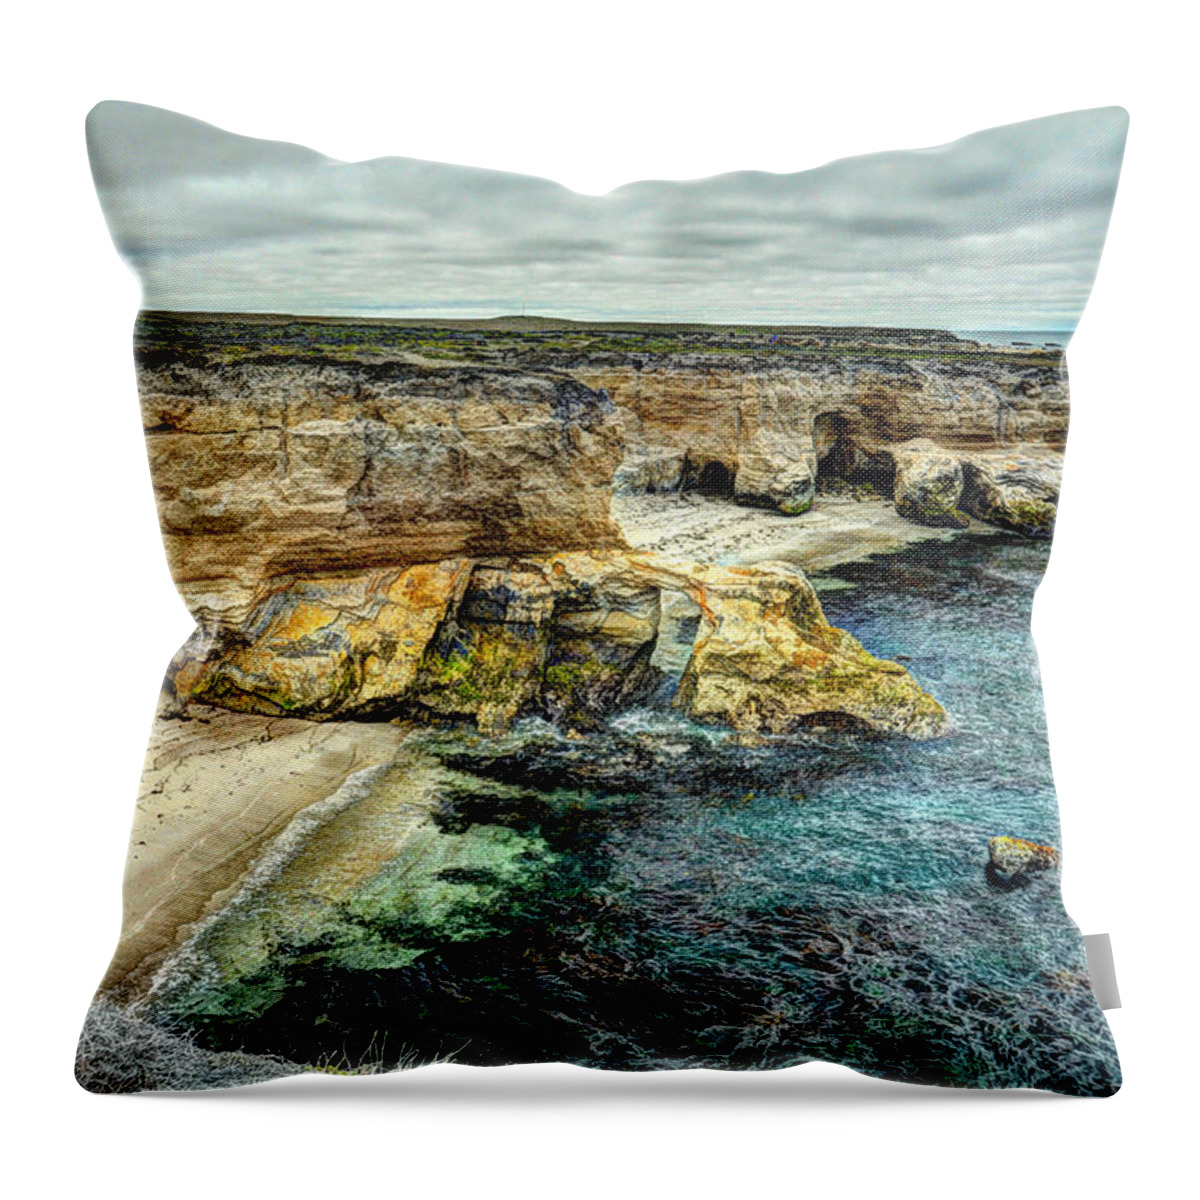 Photograph Throw Pillow featuring the photograph Montana Del Oro by Richard Gehlbach